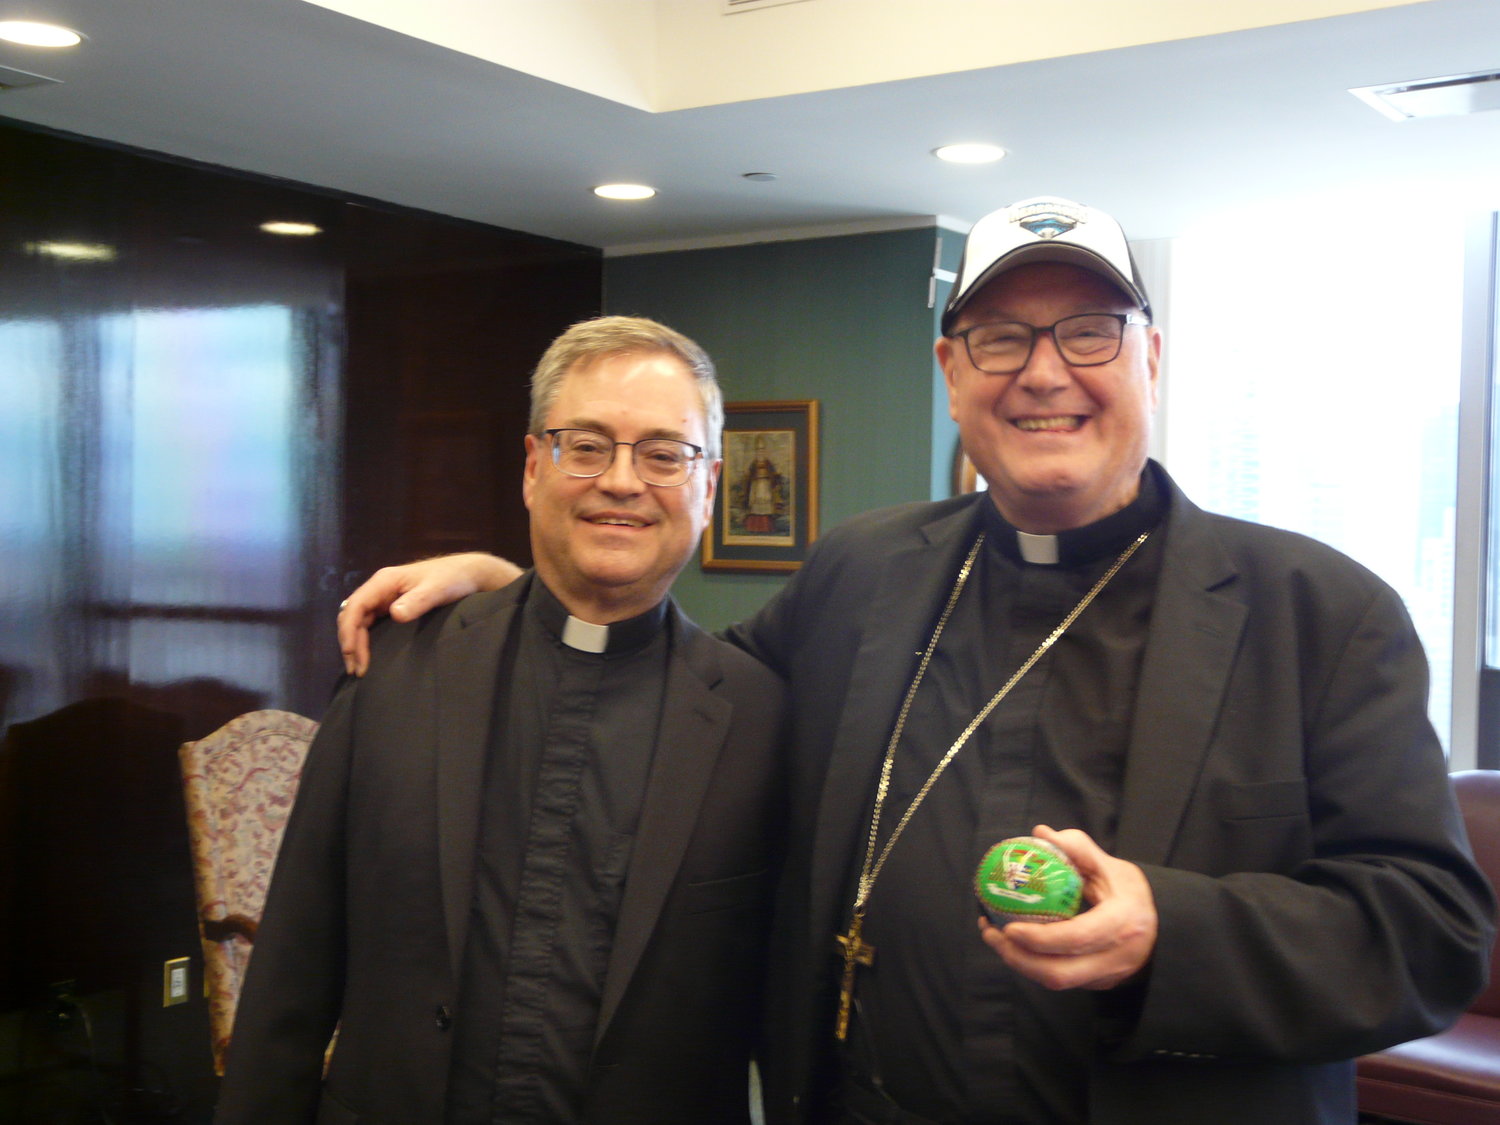 Cardinal Dolan and Father Michael McLoughlin, the pastor of St. Columba parish in Hopewell Junction, have already started to cheer for Catholic Education Night at Dutchess Stadium in Wappingers Falls, Monday, June 17, where the hometown Hudson Valley Renegades will play the Lowell Spinners in a minor league baseball contest. The cardinal holds a ball with a logo of St. Patrick's Cathedral to be given free to the first 2,500 fans to enter the stadium.